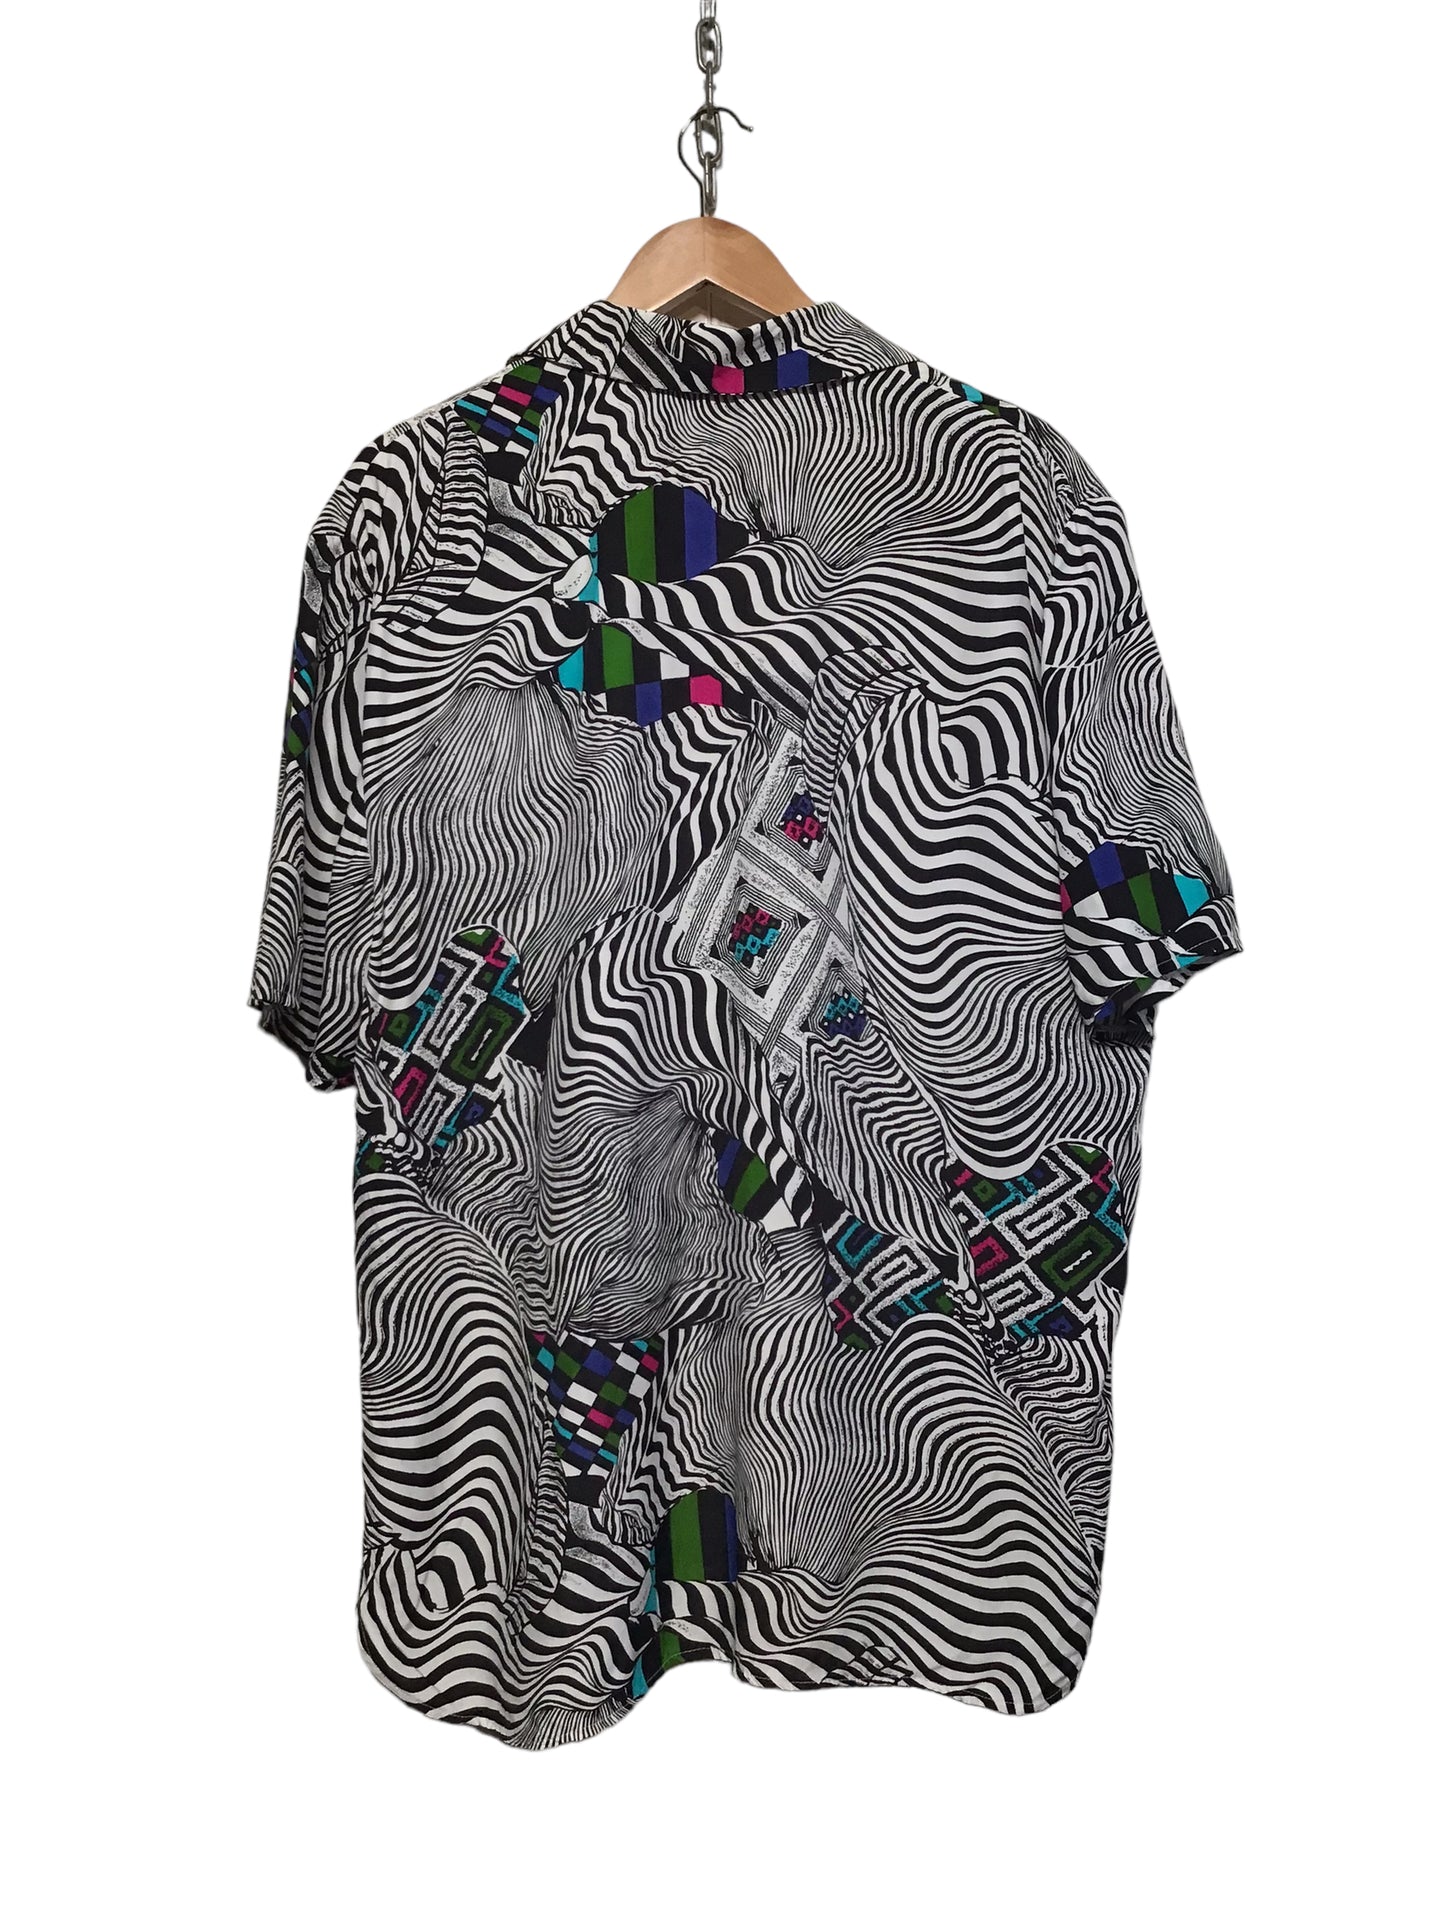 Black and White Printed Shirt (Size L)